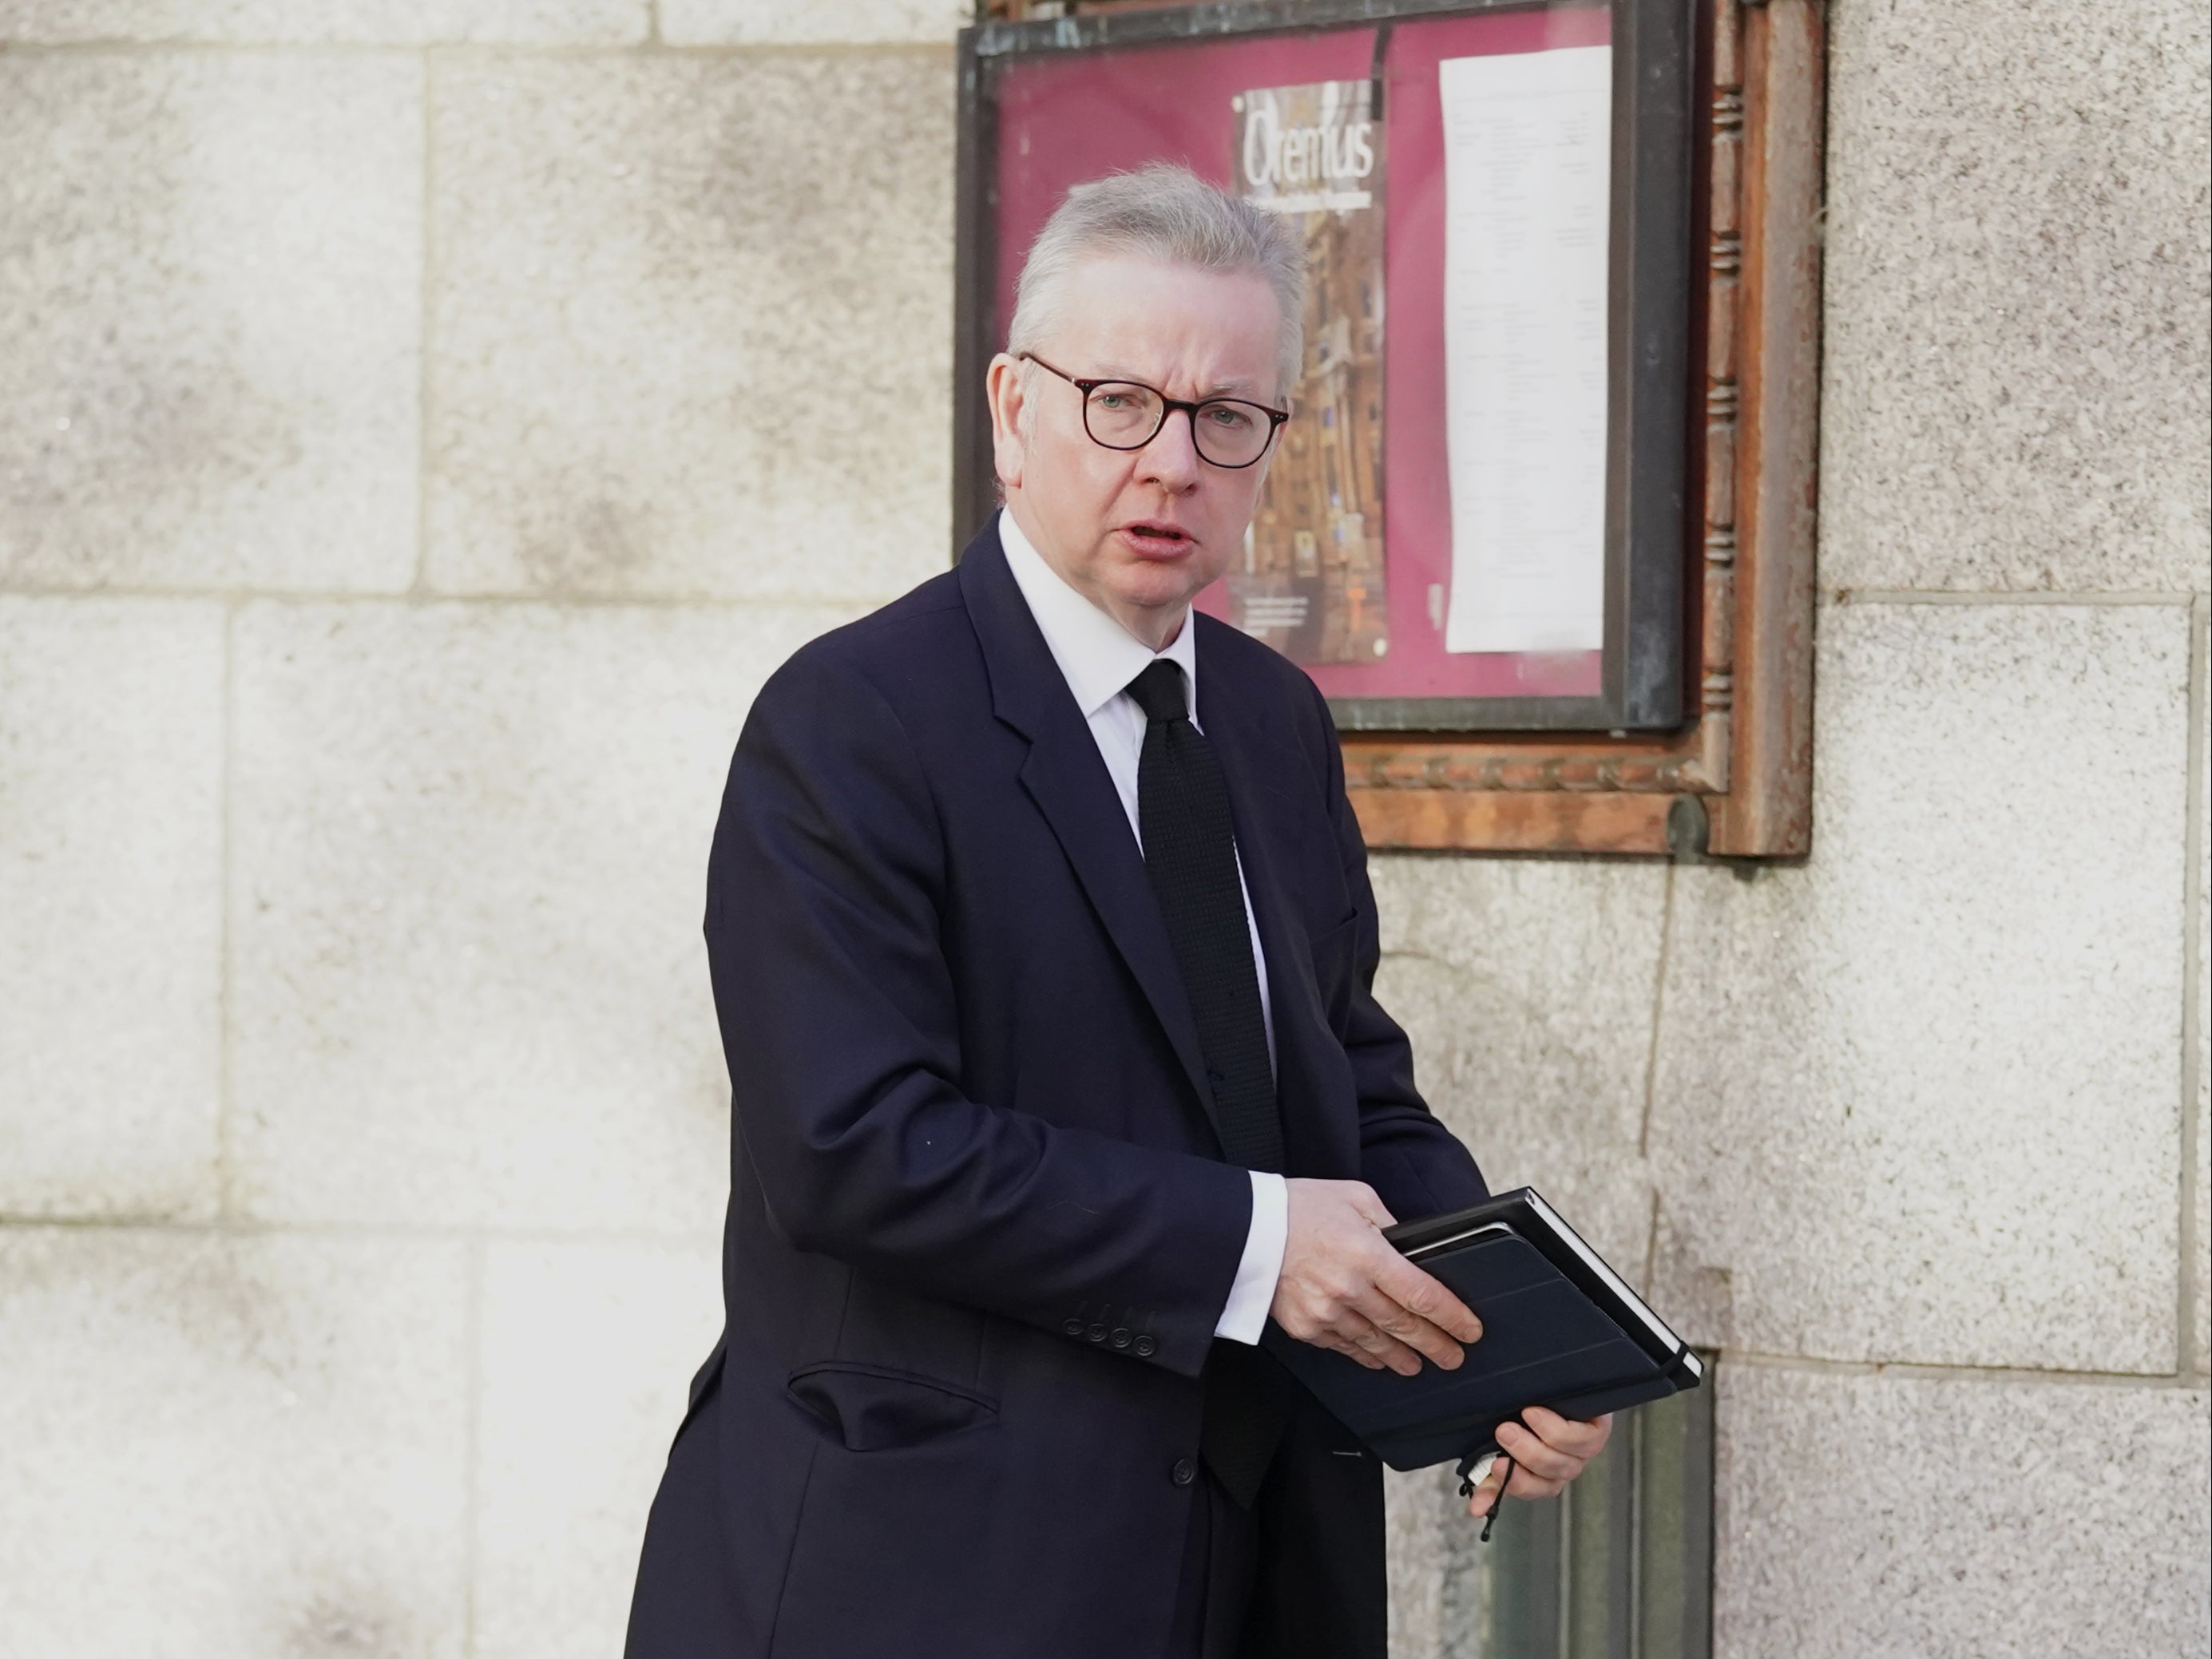 On Monday, Mr Gove said support must be targeted to those who need it most